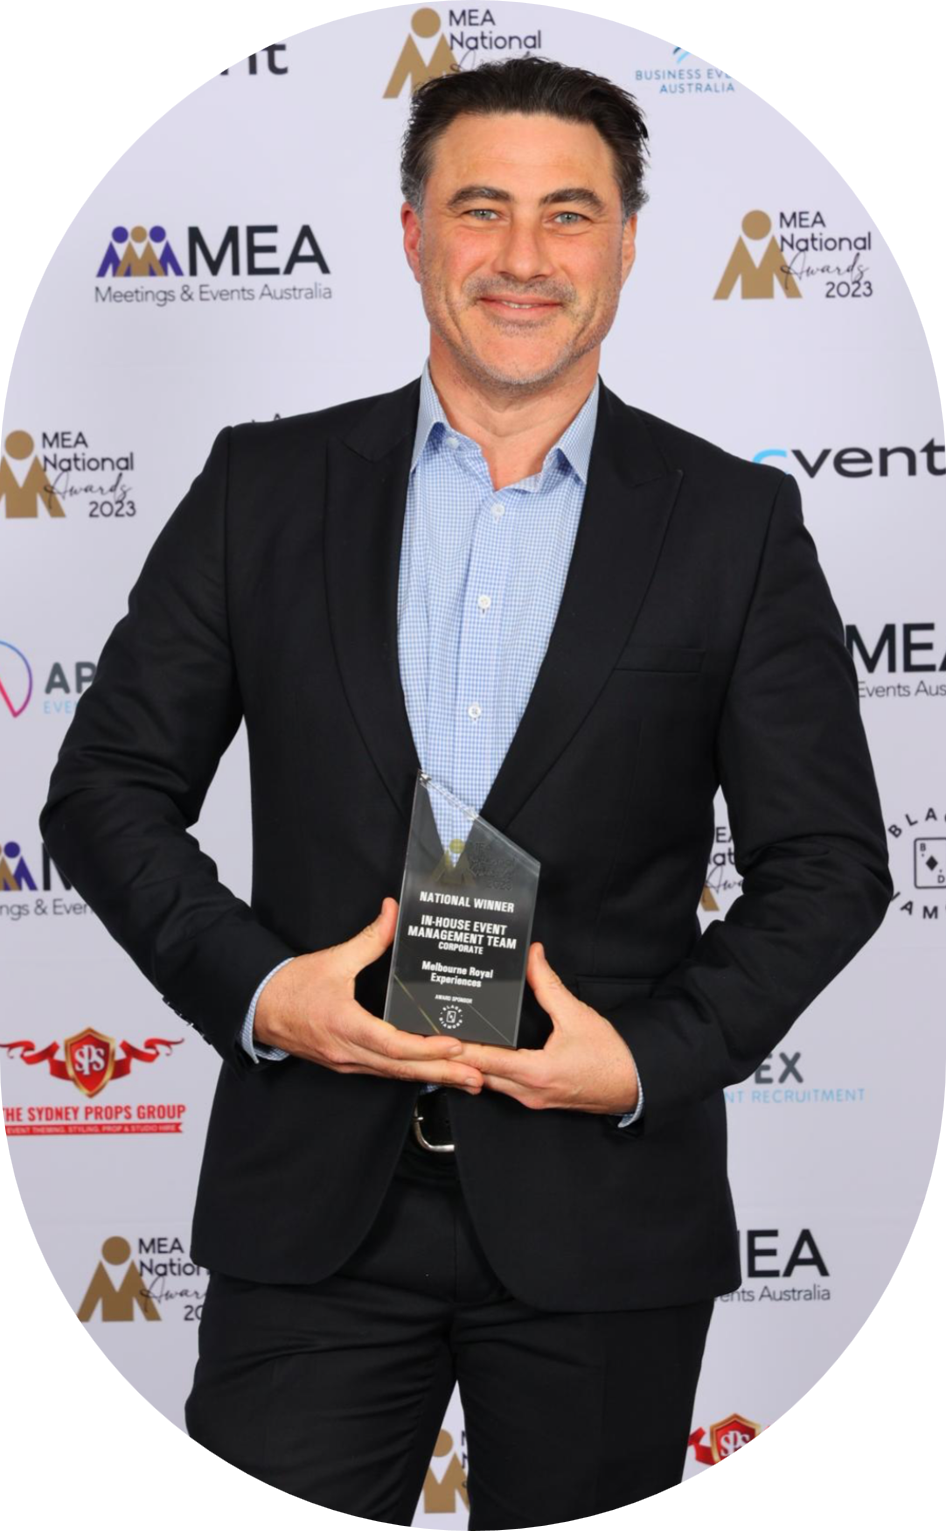 Pictured: James Gilham, Melbourne Royal Senior Business Development Manager accepting the award on behalf of the Melbourne Royal Experiences team.